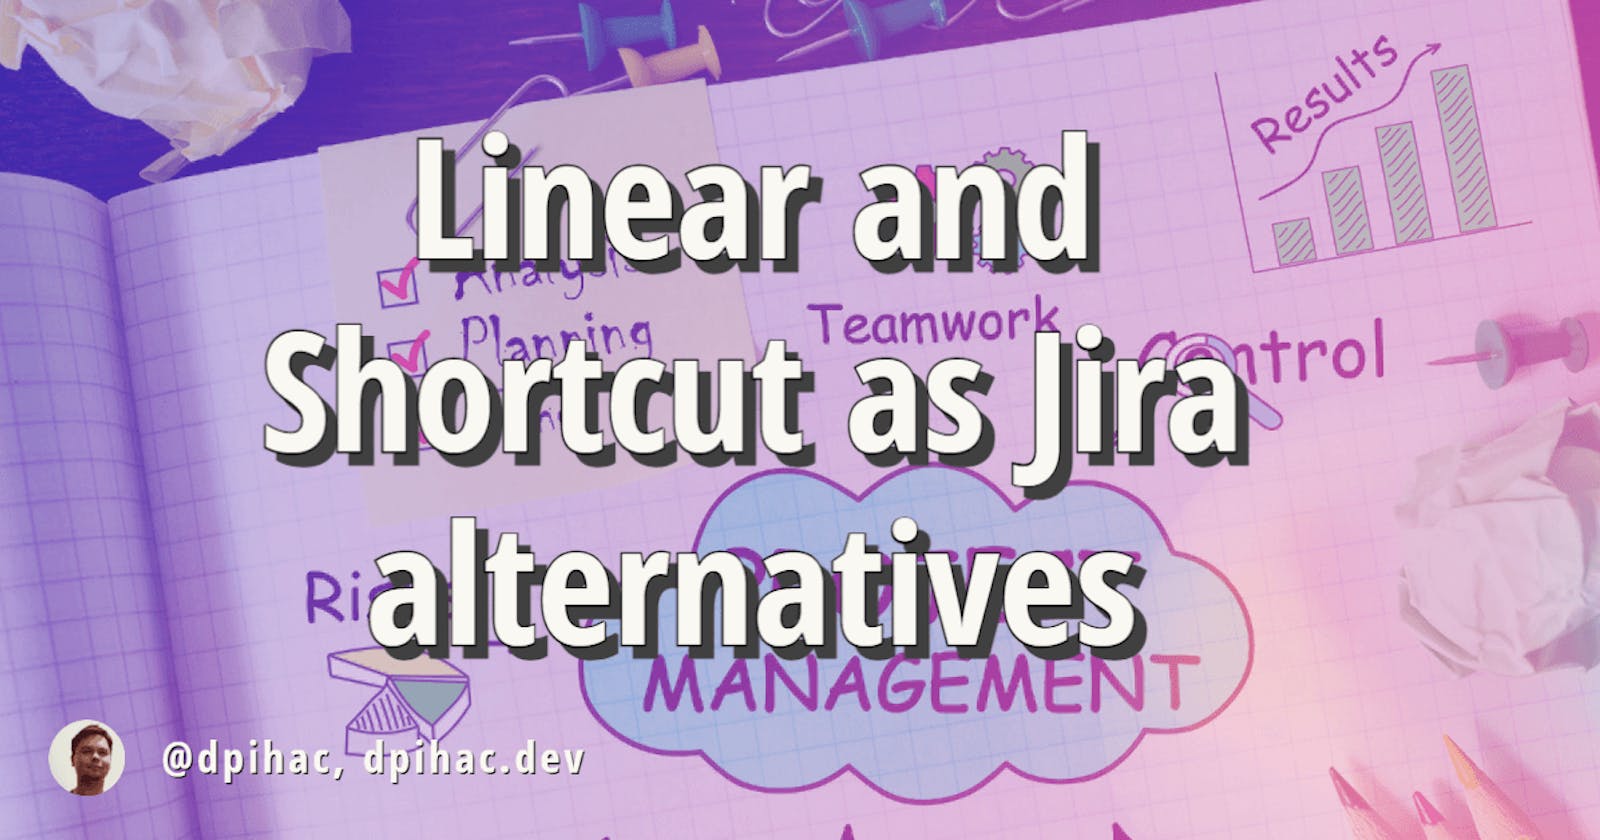 Why Linear and Shortcut are the best Jira alternatives